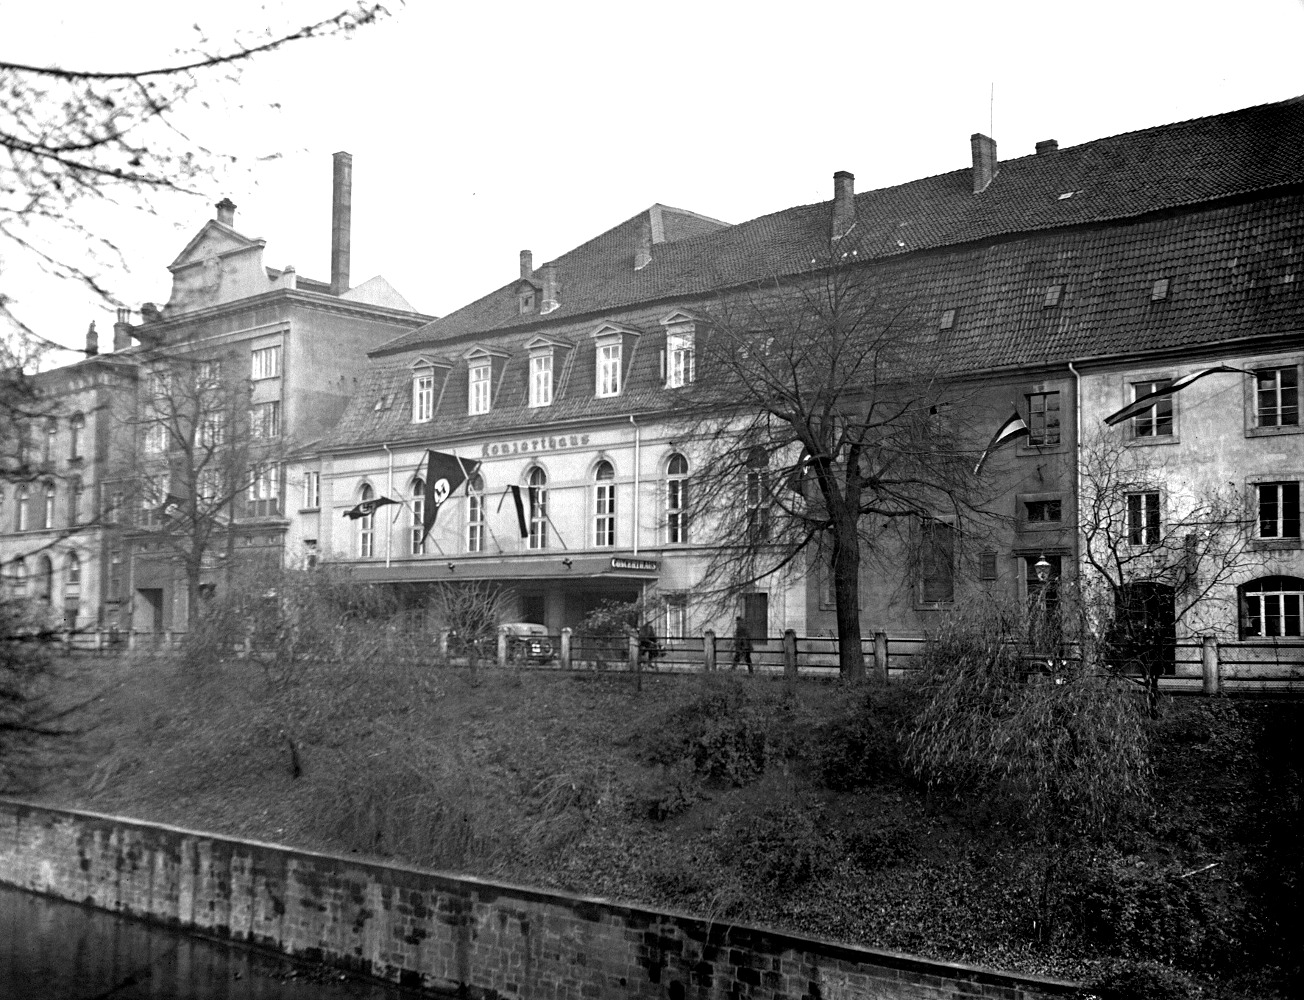 Hanover: With swastika flag – concert hall at Hohe Ufer in the former riding arena; on the right, adjacent, New Stables [Neuer Marstall], undated. Historical Museum of Hanover